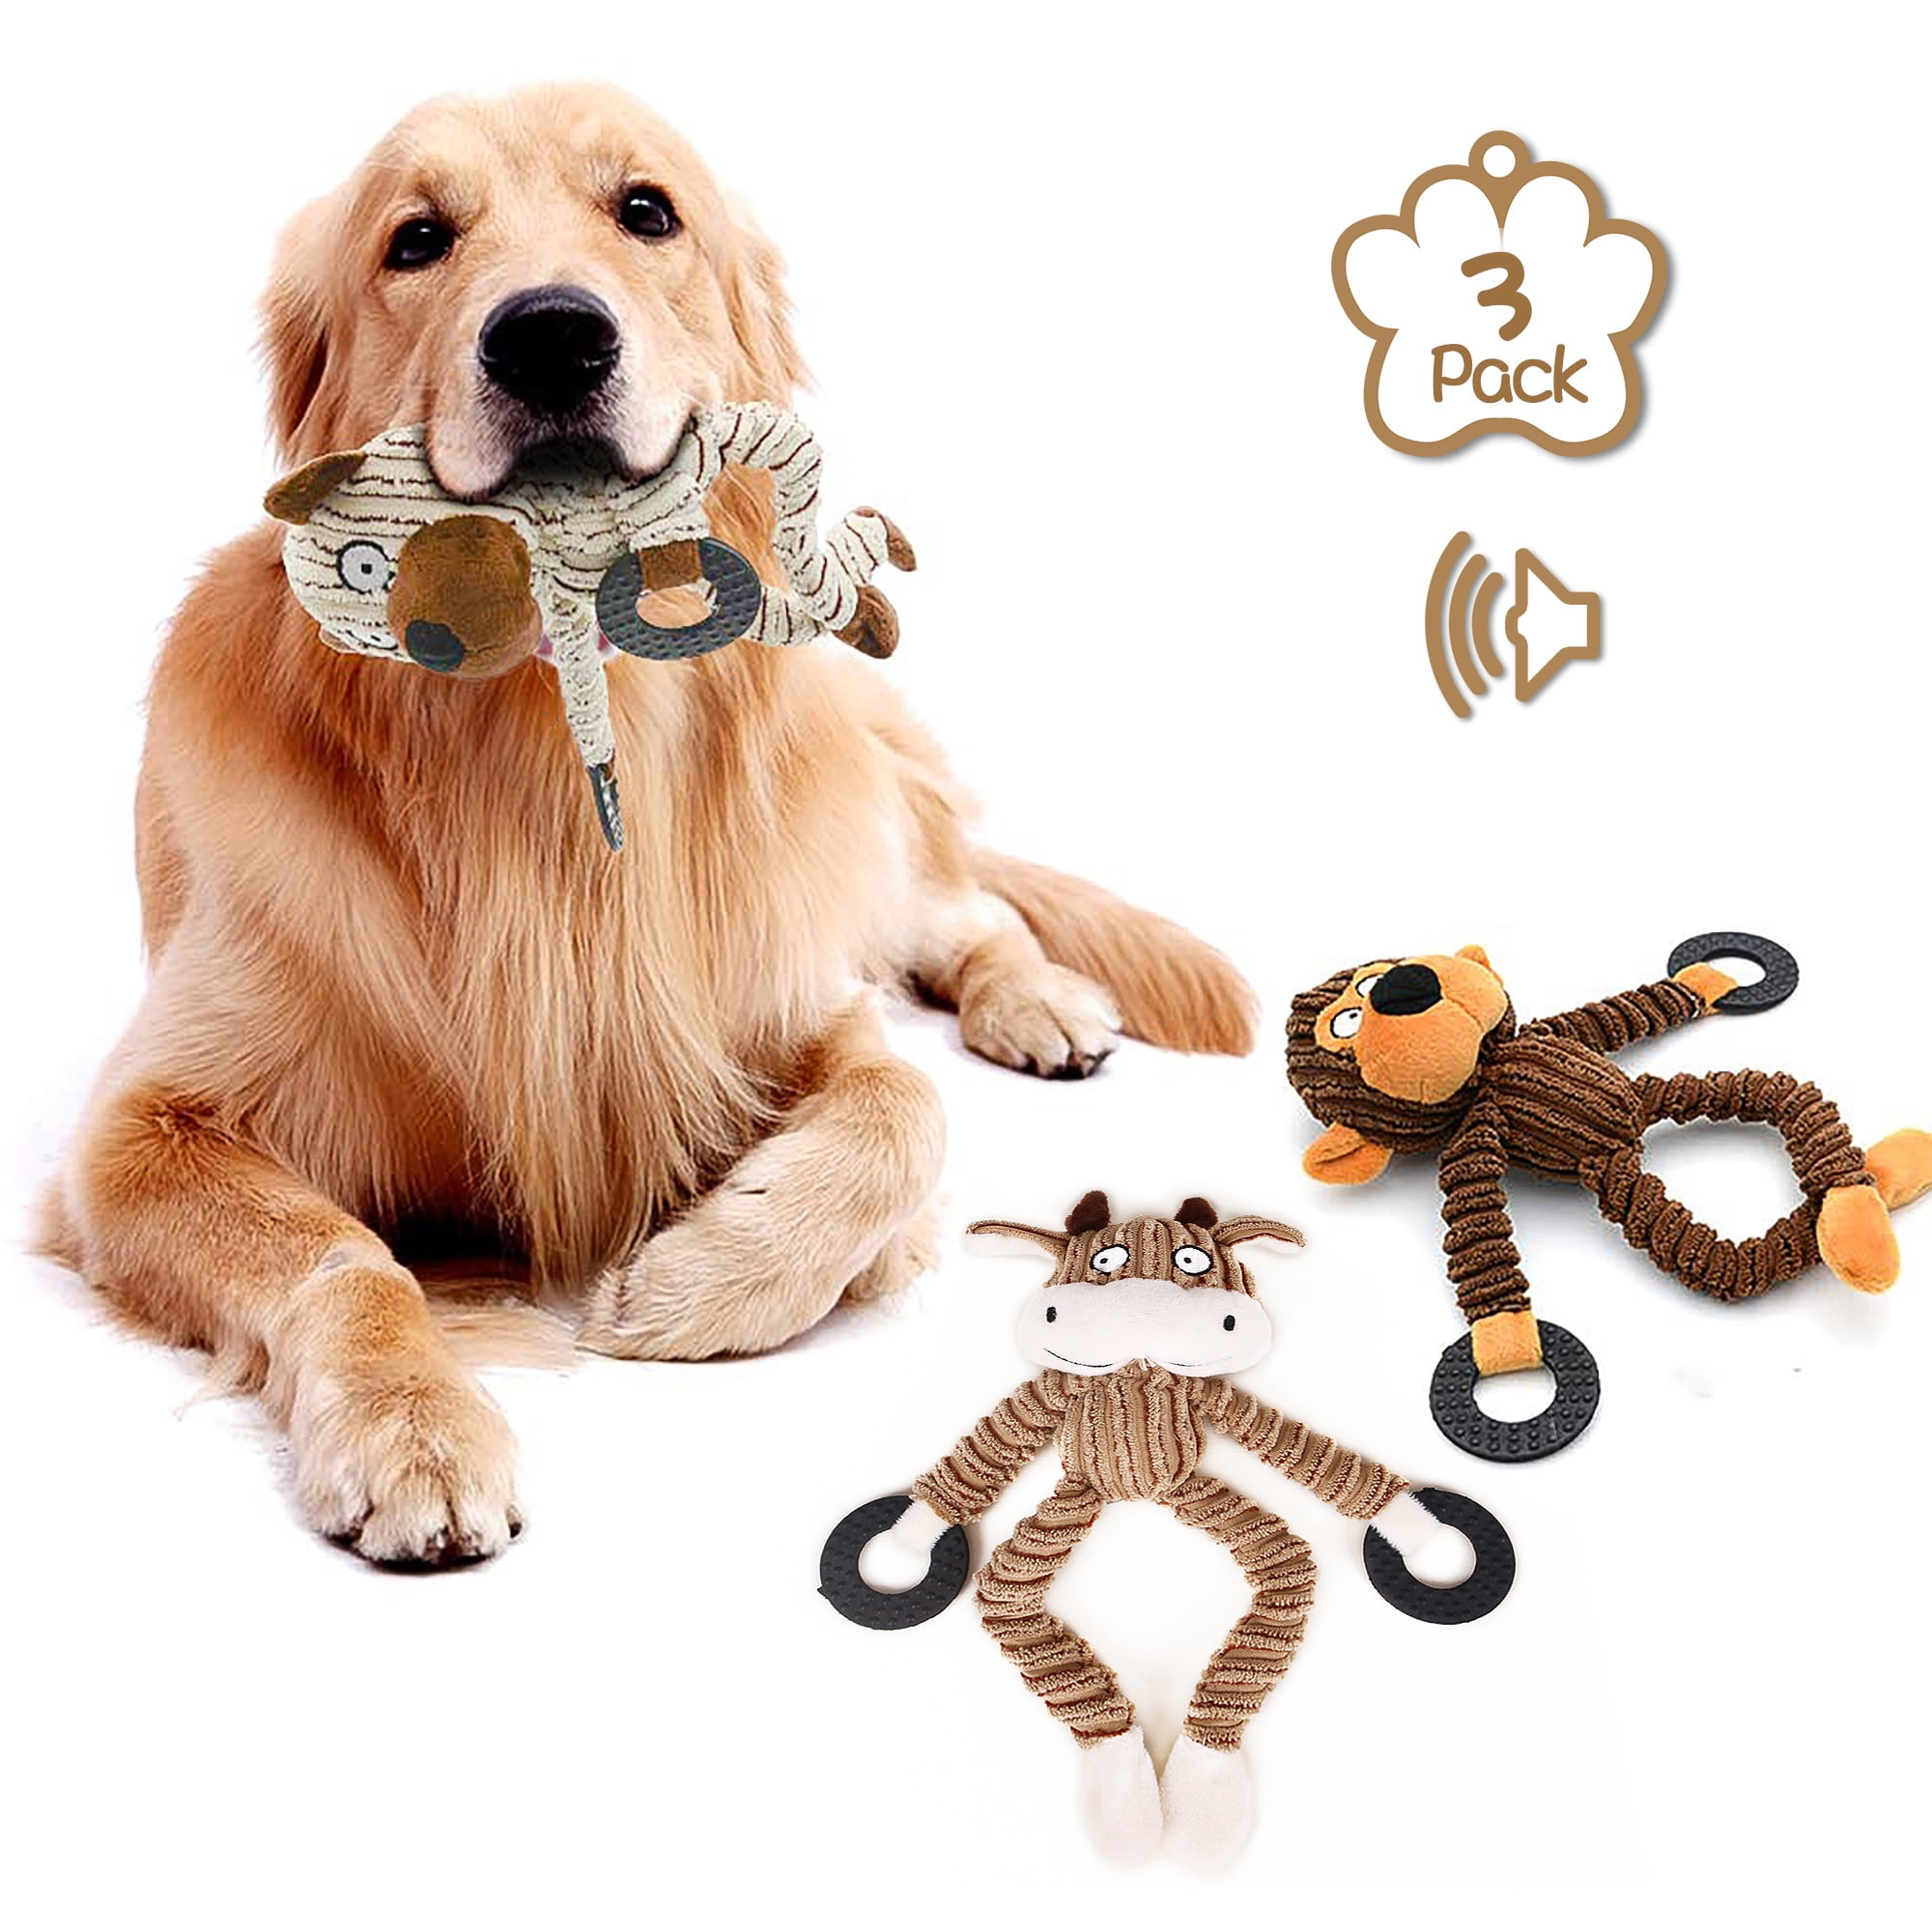 dog toys for puppies